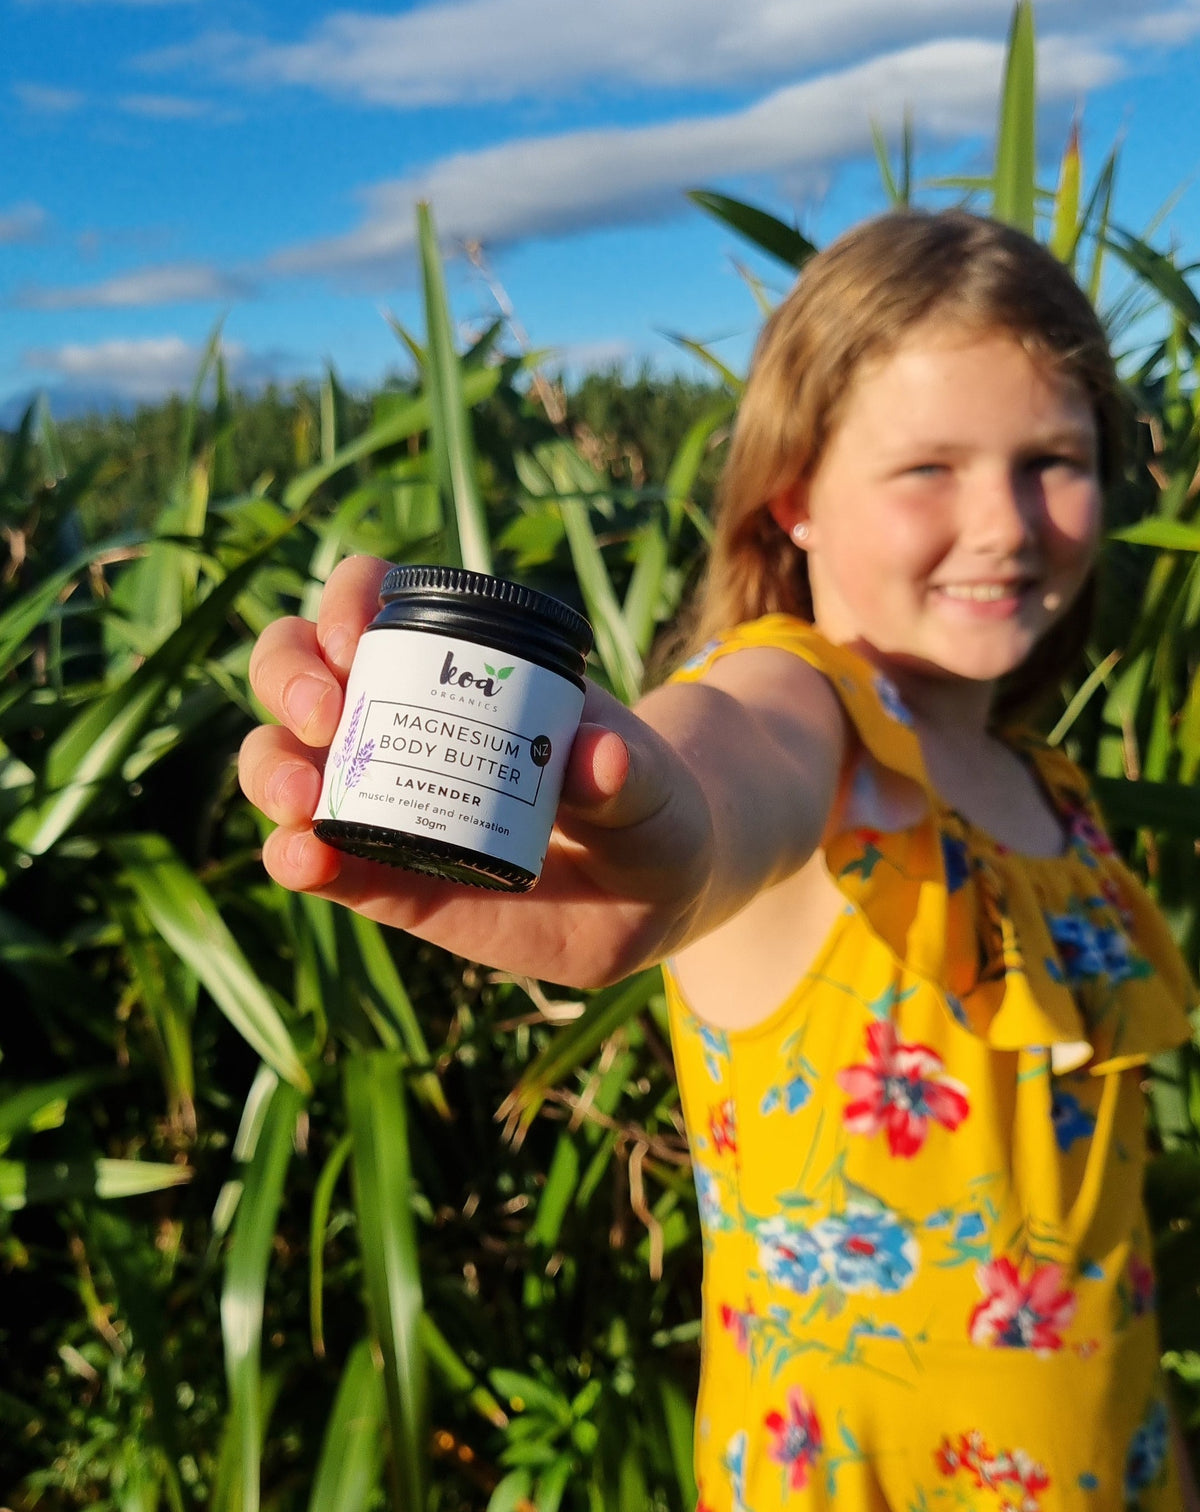 Kids sleep better with Magnesium Body Butter with Lavender